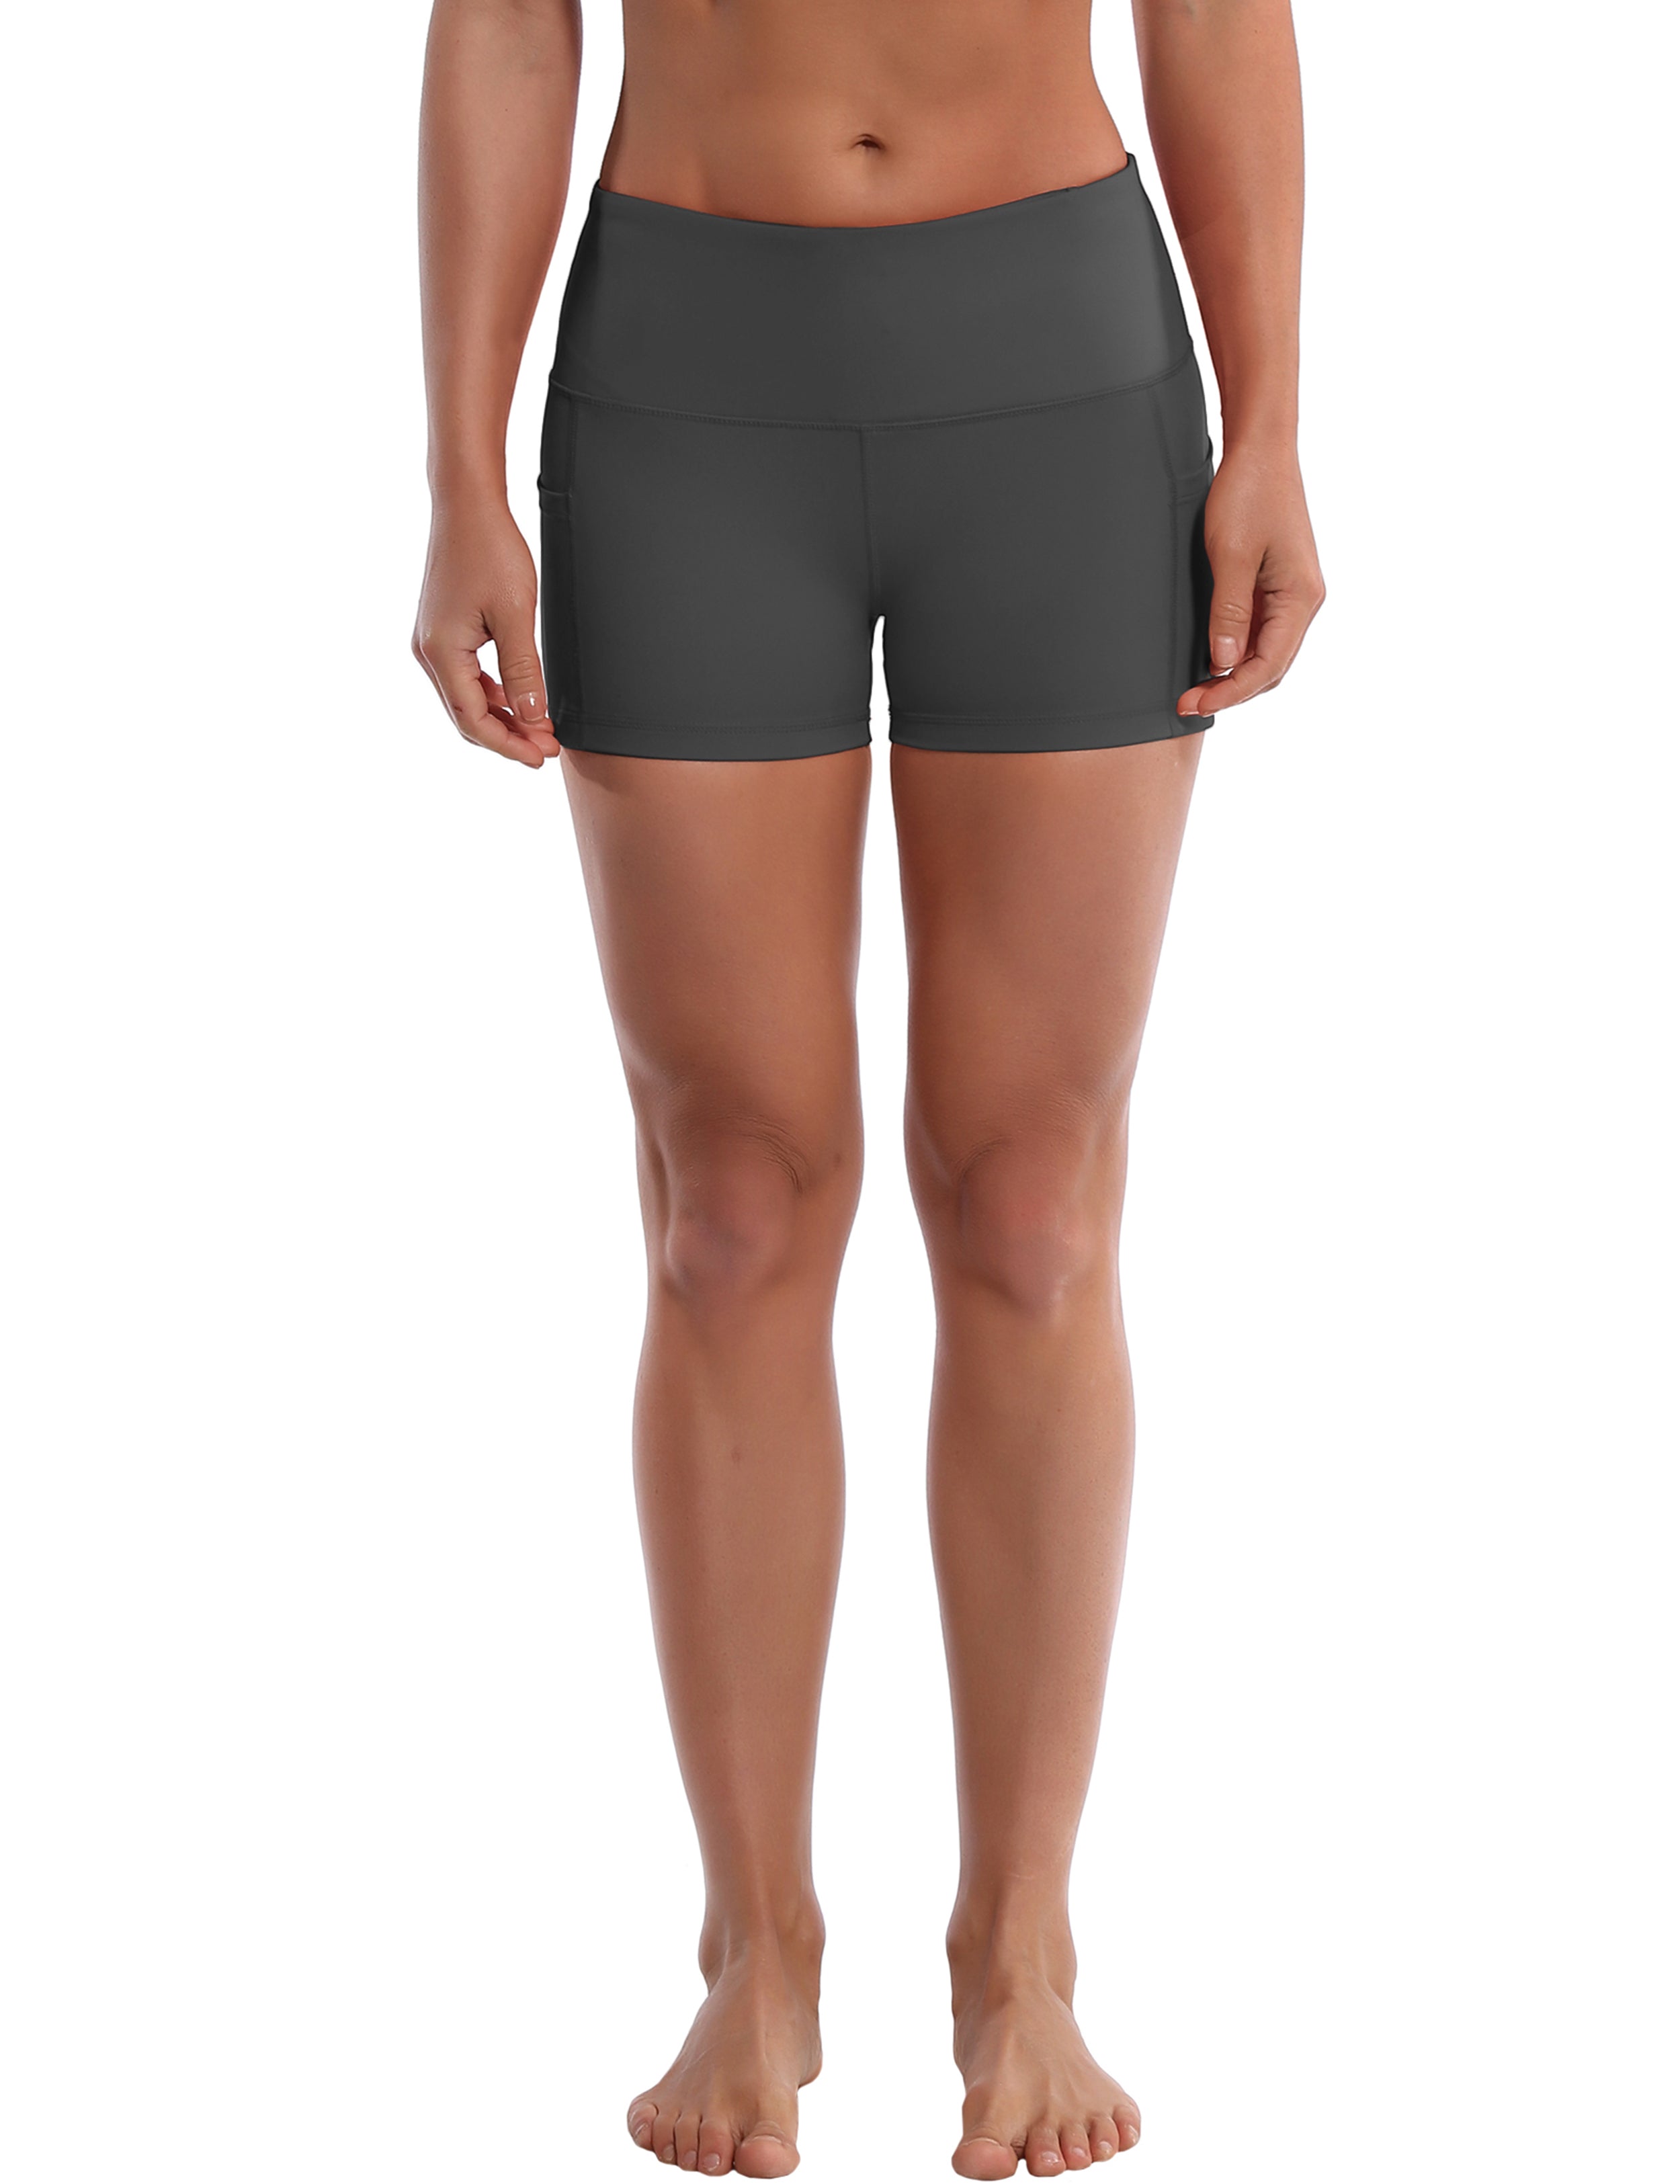 2.5" Side Pockets Pilates Shorts shadowcharcoal Sleek, soft, smooth and totally comfortable: our newest sexy style is here. Softest-ever fabric High elasticity High density 4-way stretch Fabric doesn't attract lint easily No see-through Moisture-wicking Machine wash 78% Polyester, 22% Spandex